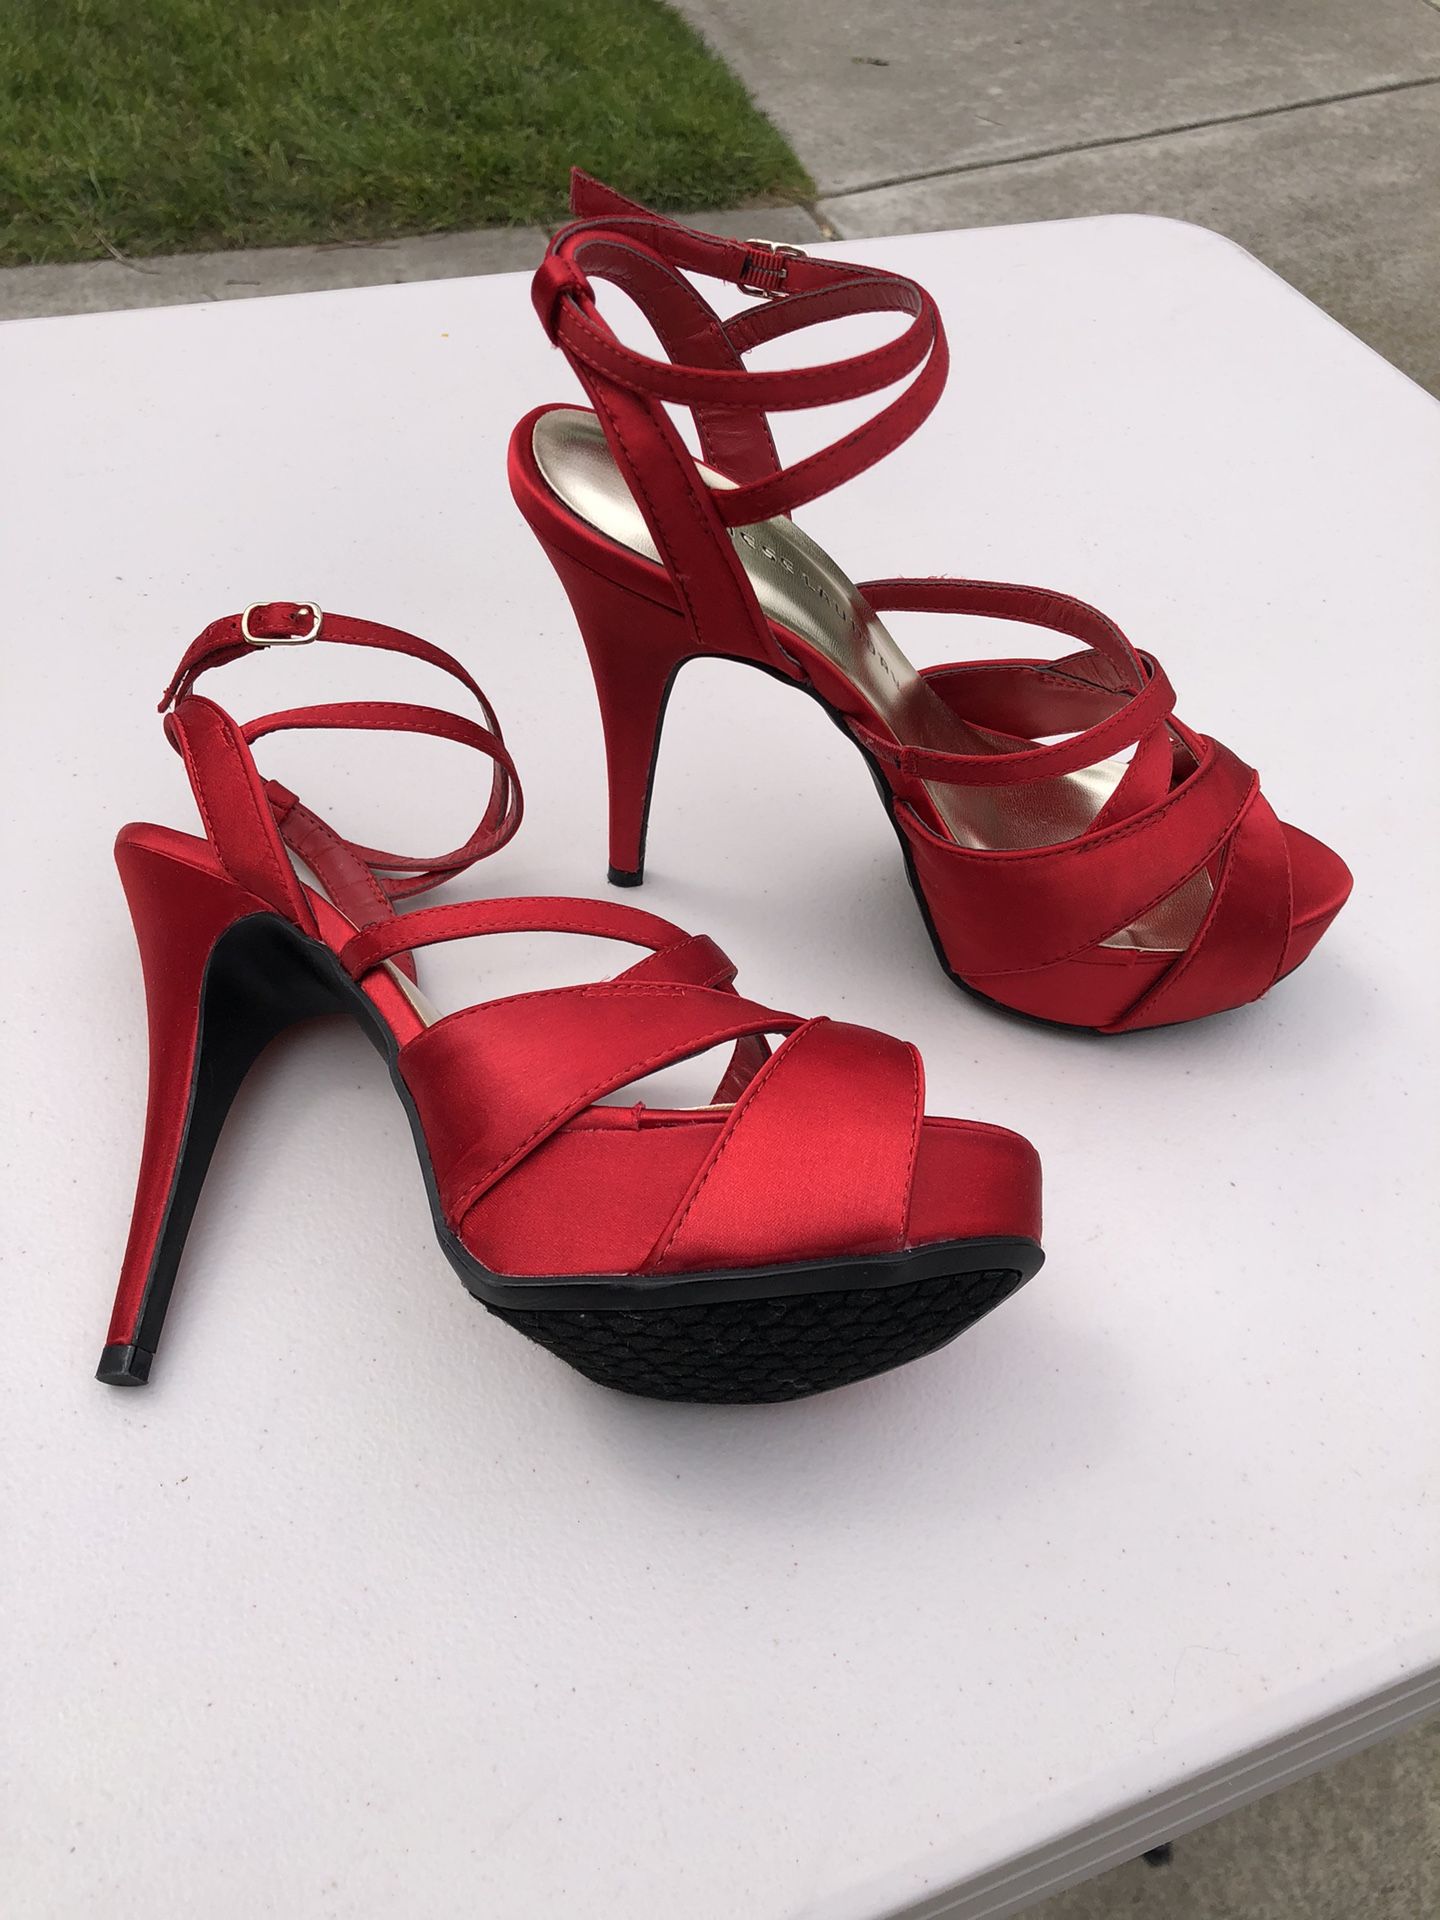 New Satin Red High Heels Size 8